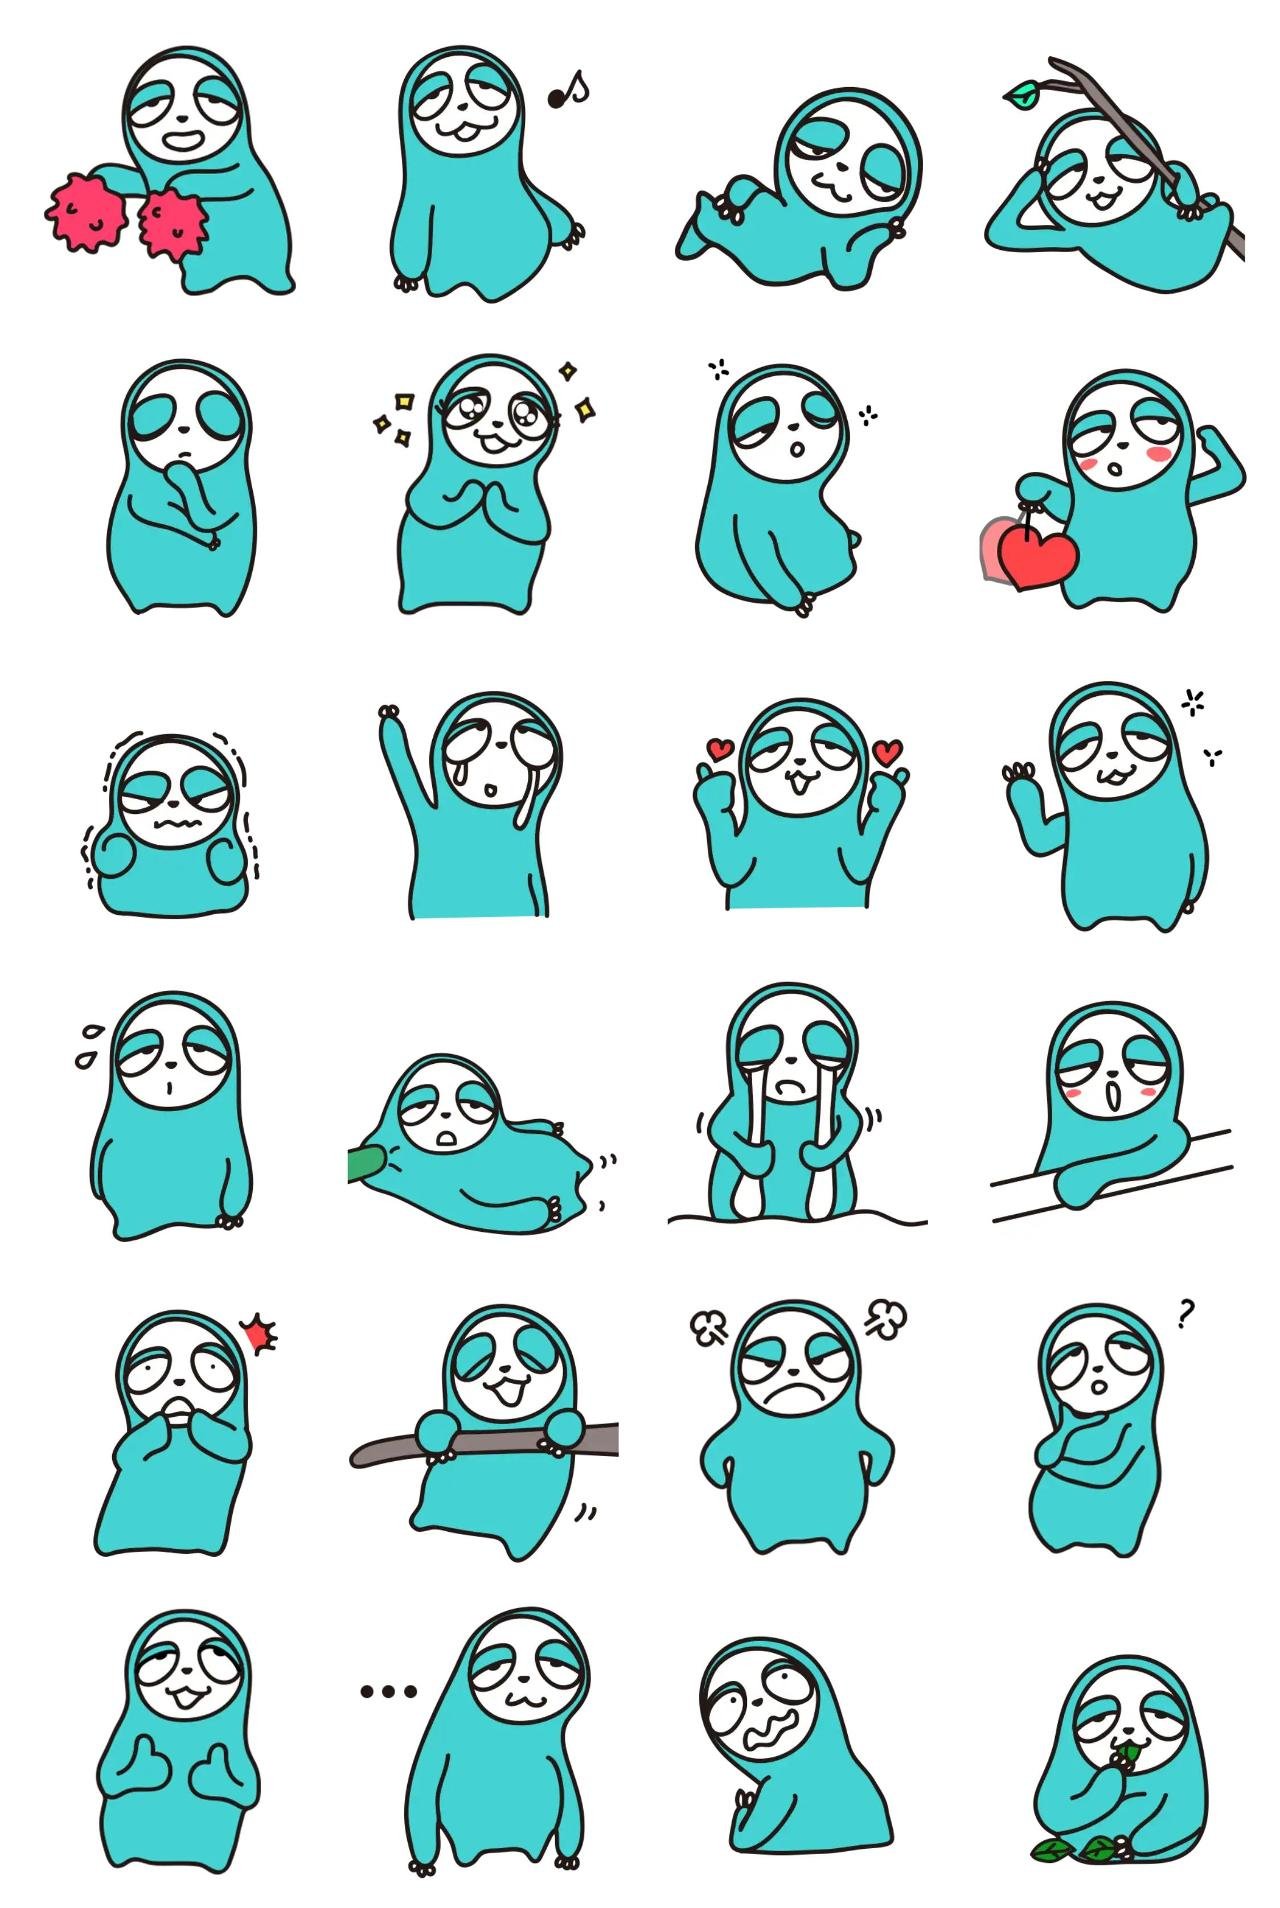 Our Bo Animation/Cartoon sticker pack for Whatsapp, Telegram, Signal, and others chatting and message apps